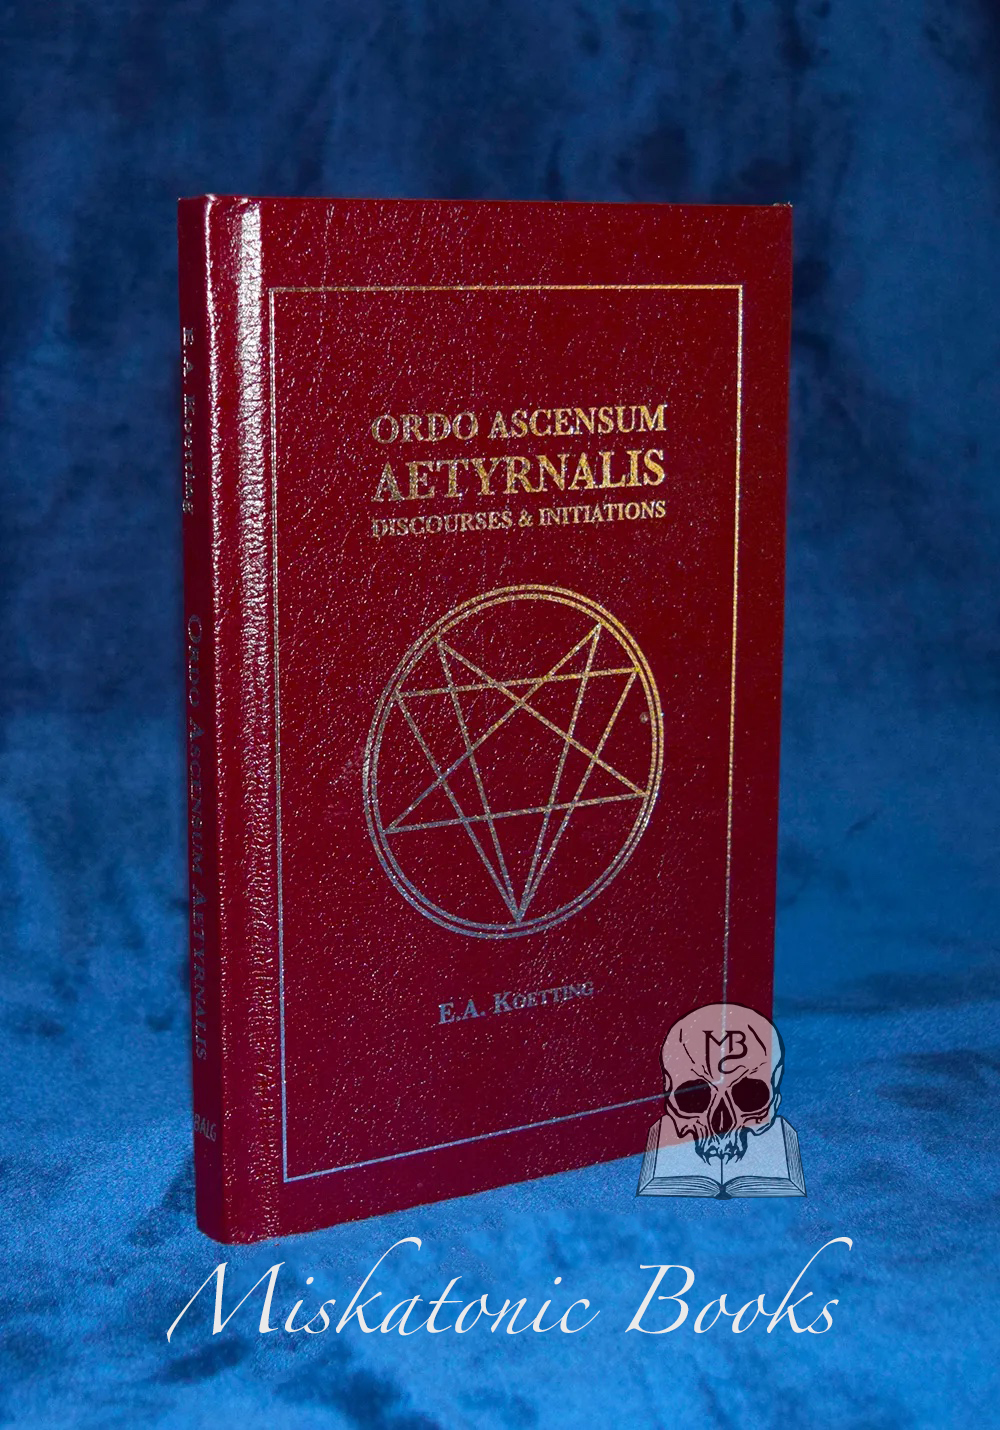 ORDO ASCENSUM AETYRNALIS by E. A. Koetting - Limited Edition Hardcover